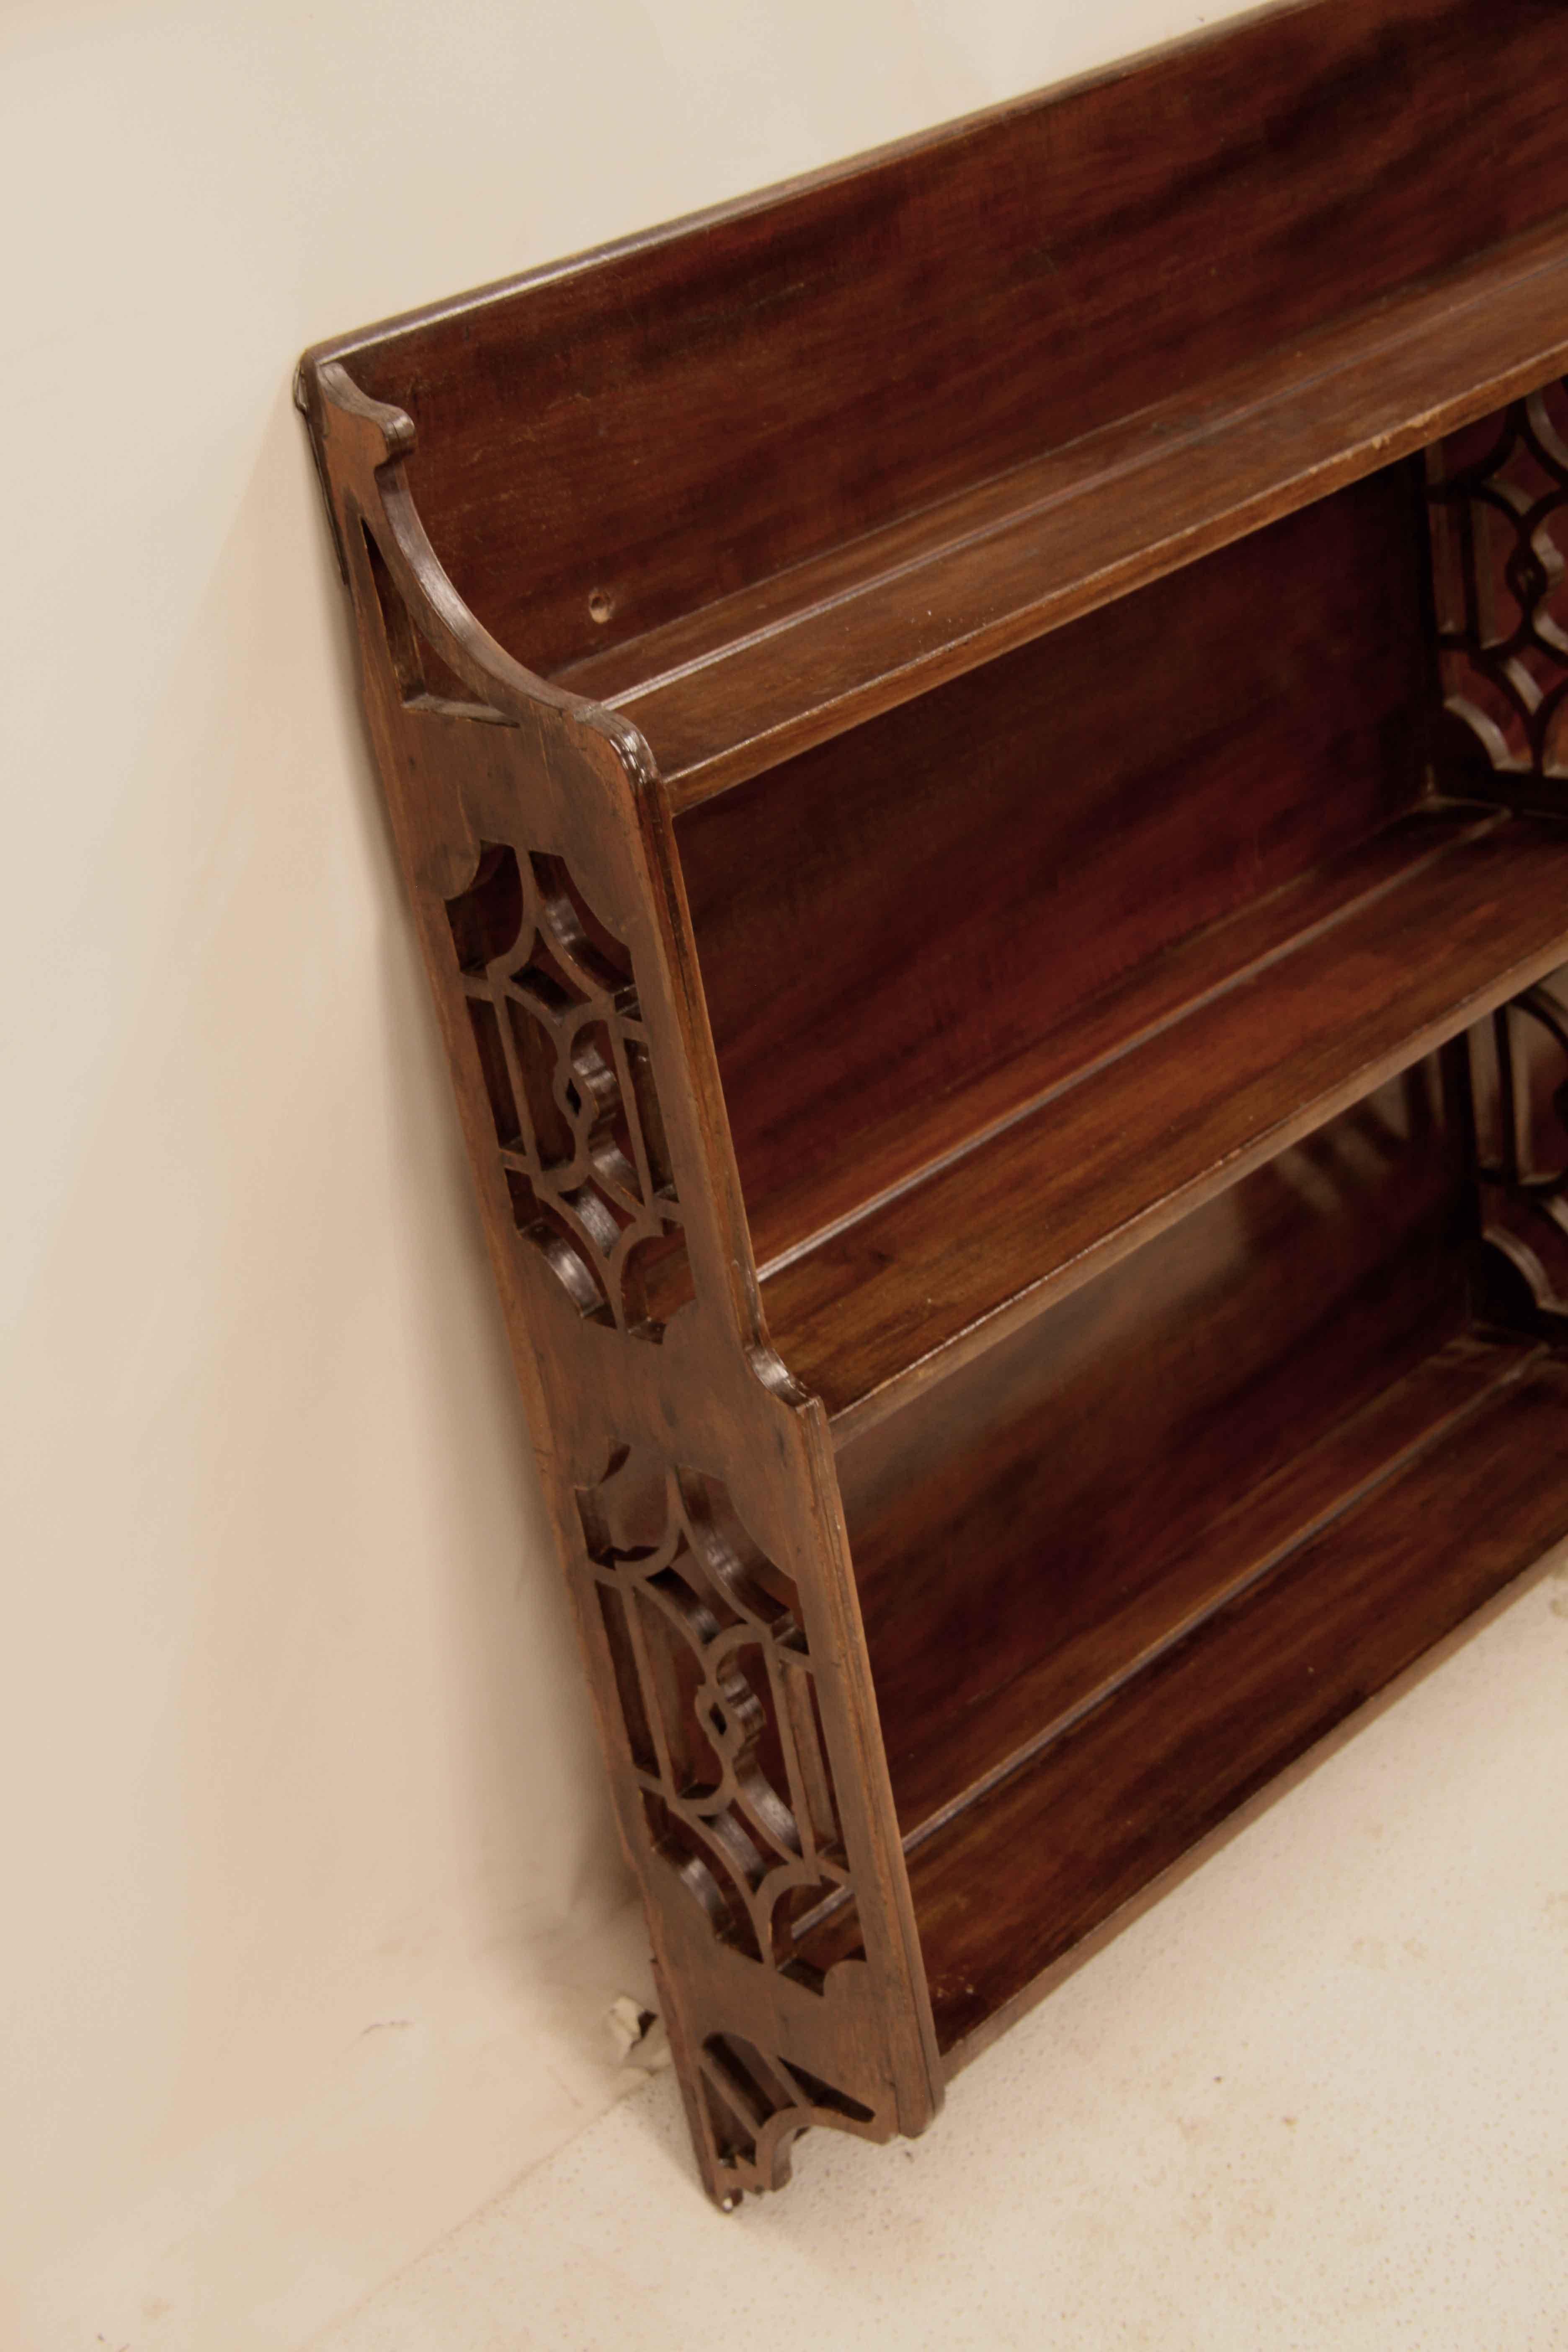 English mahogany hanging shelf, the decorative feature of this shelf and what will make a statement on the wall is the reticulated open design of the  ends and center support.  The top shelf is 5'' deep , the lower two shelves are 6'' deep.  The